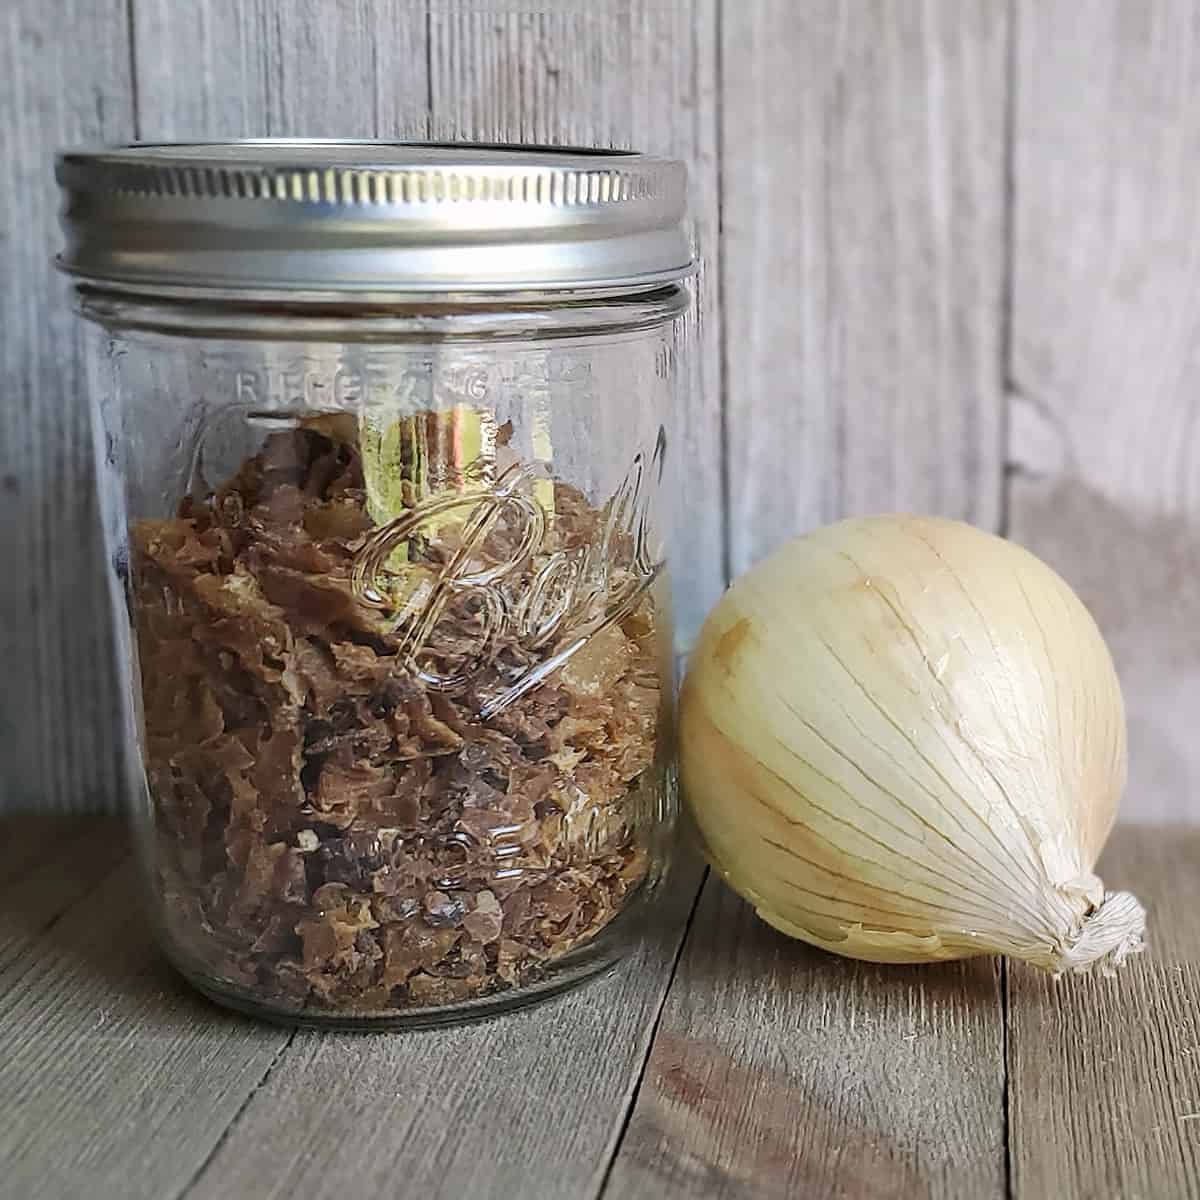 Mason jar of dehydrated caramelized onion with a fresh onion on a wooden surface